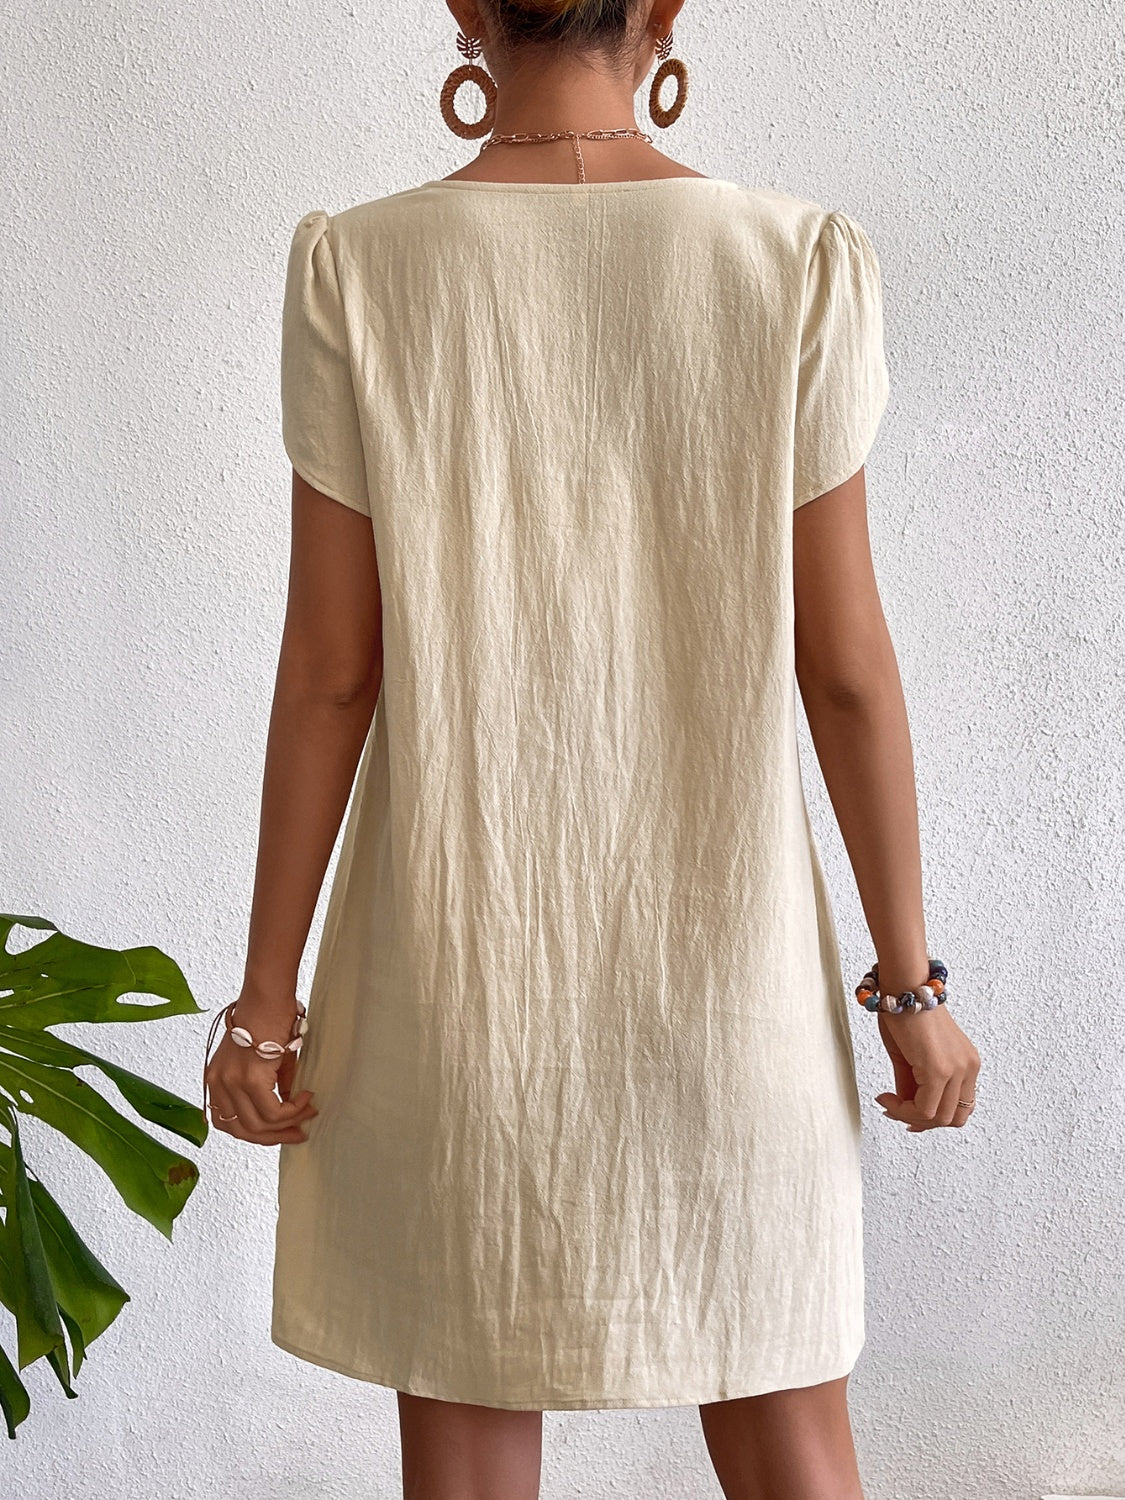 Asymmetrical Neck Short Sleeve Dress for Women Over 50, Perfect for Summer Beach Wedding Guest or Party Attire